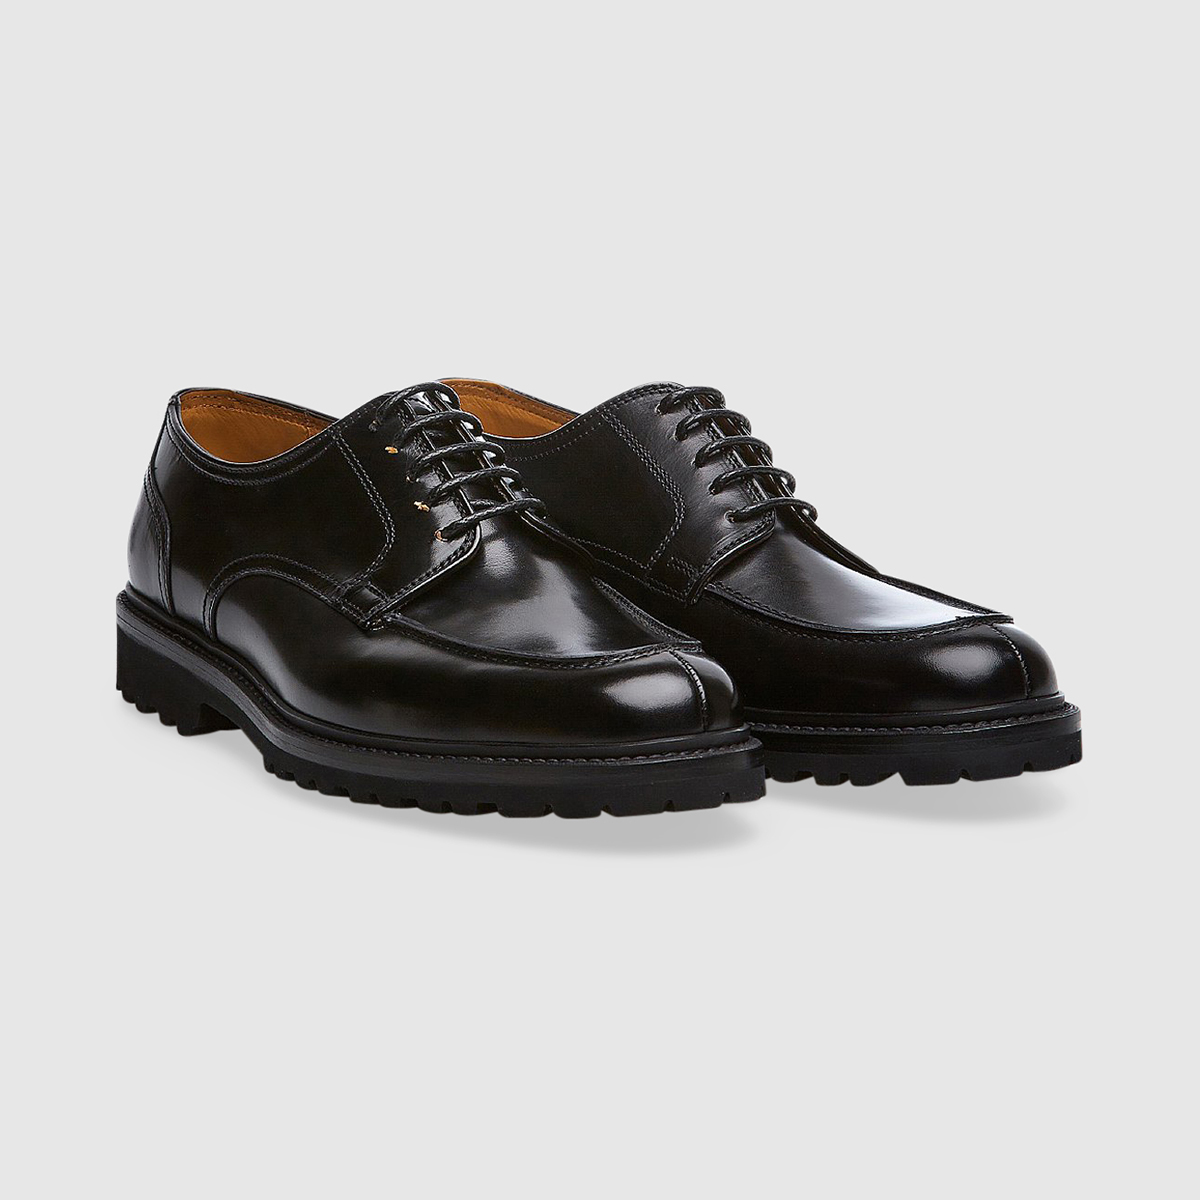 Five Hole Lace-up Shoes in Black Calfskin Gruppo Fabi on sale 2022 2